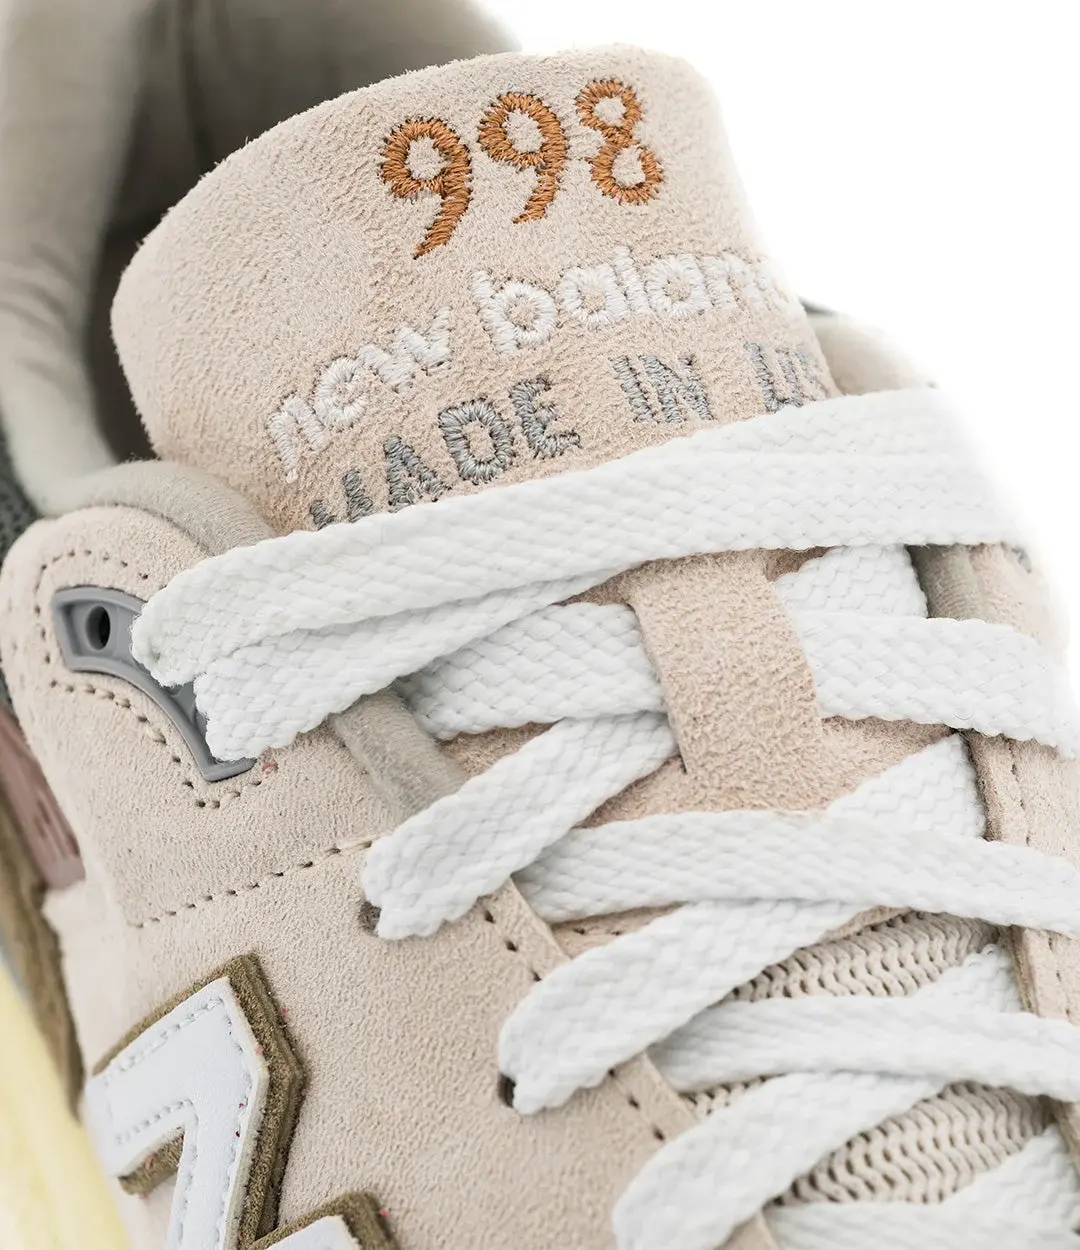 Concepts x New Balance 998 Made in USA 'C-Note'